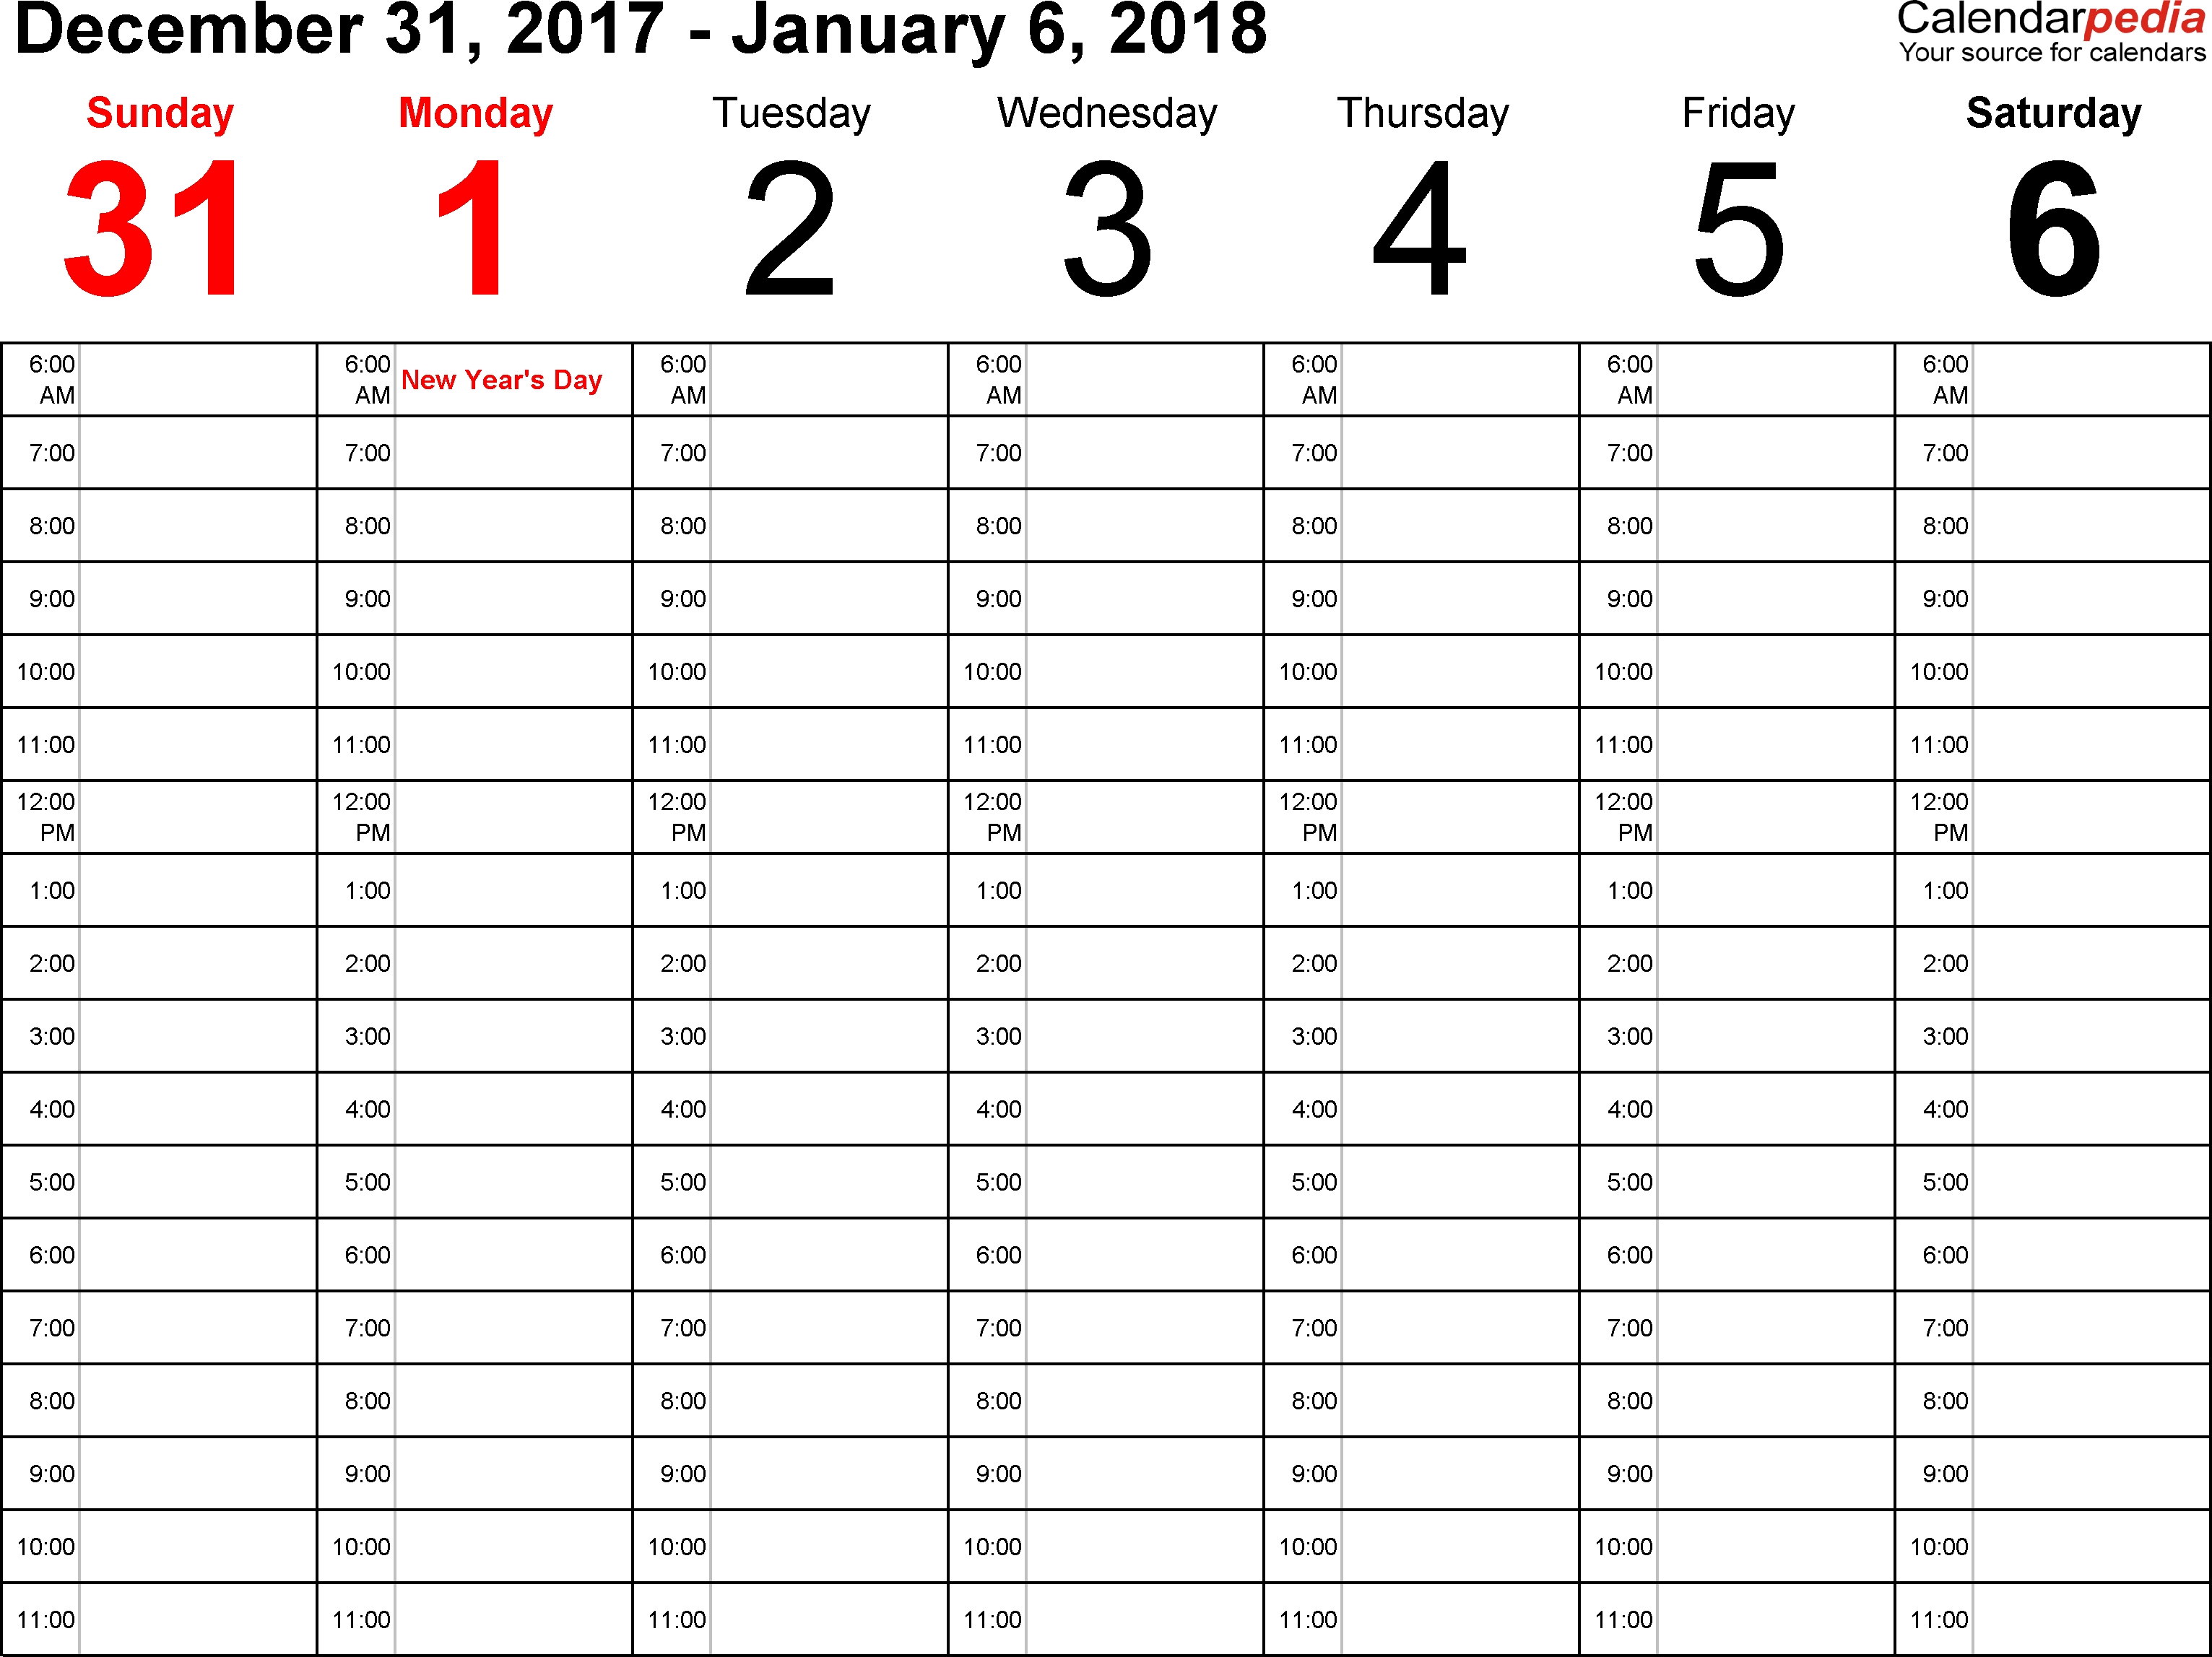 Weekly Calendars 2018 For Excel - 12 Free Printable Templates